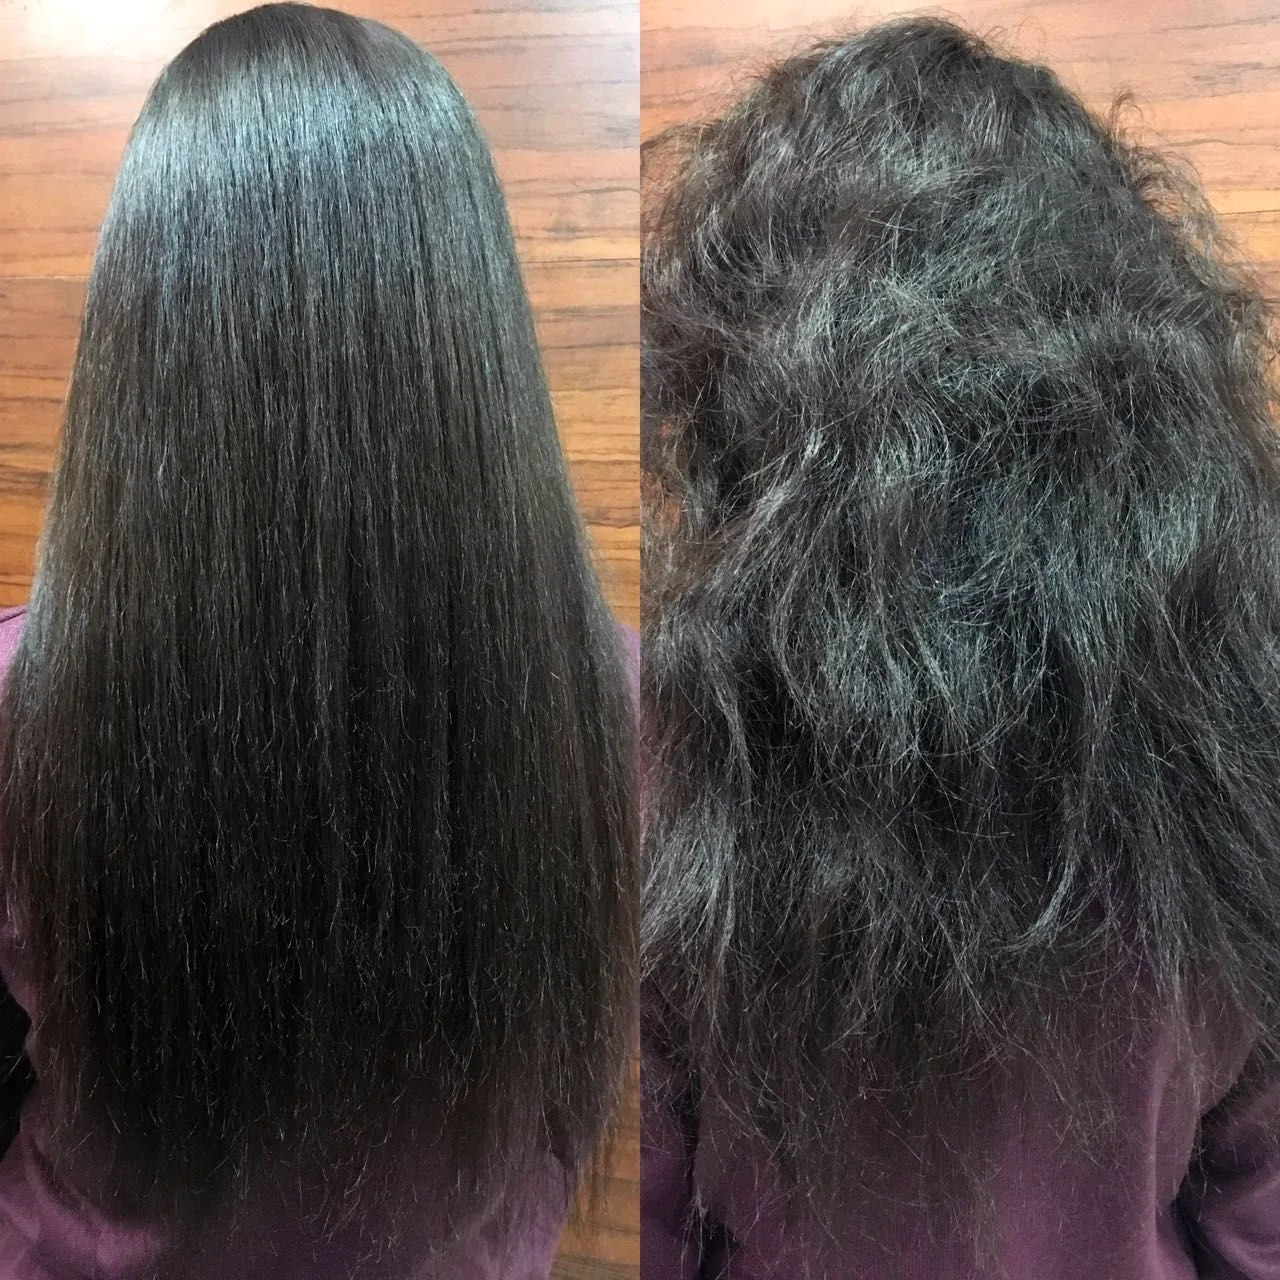 Keratin hair Straightening before after